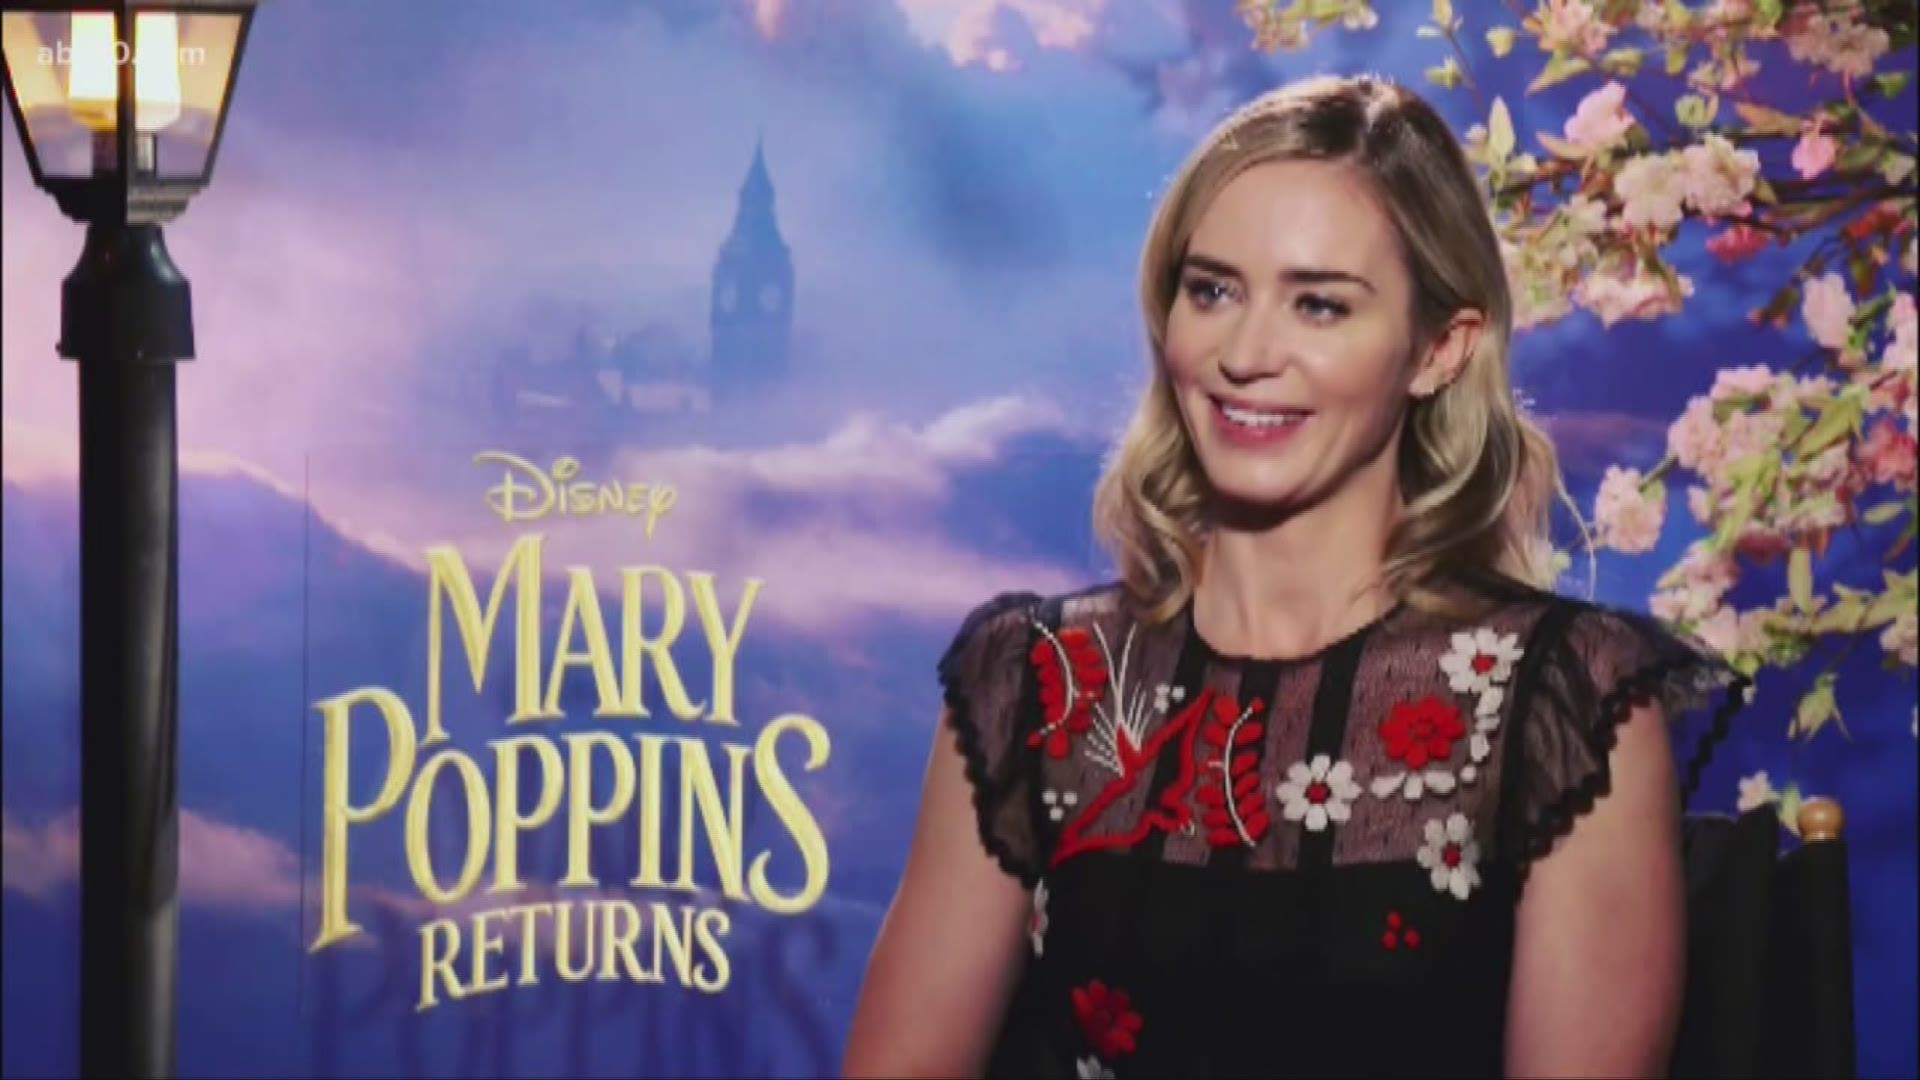 Mark S. Allen sat down with Emily Blunt to talk about her new movie "Mary Poppins Returns."